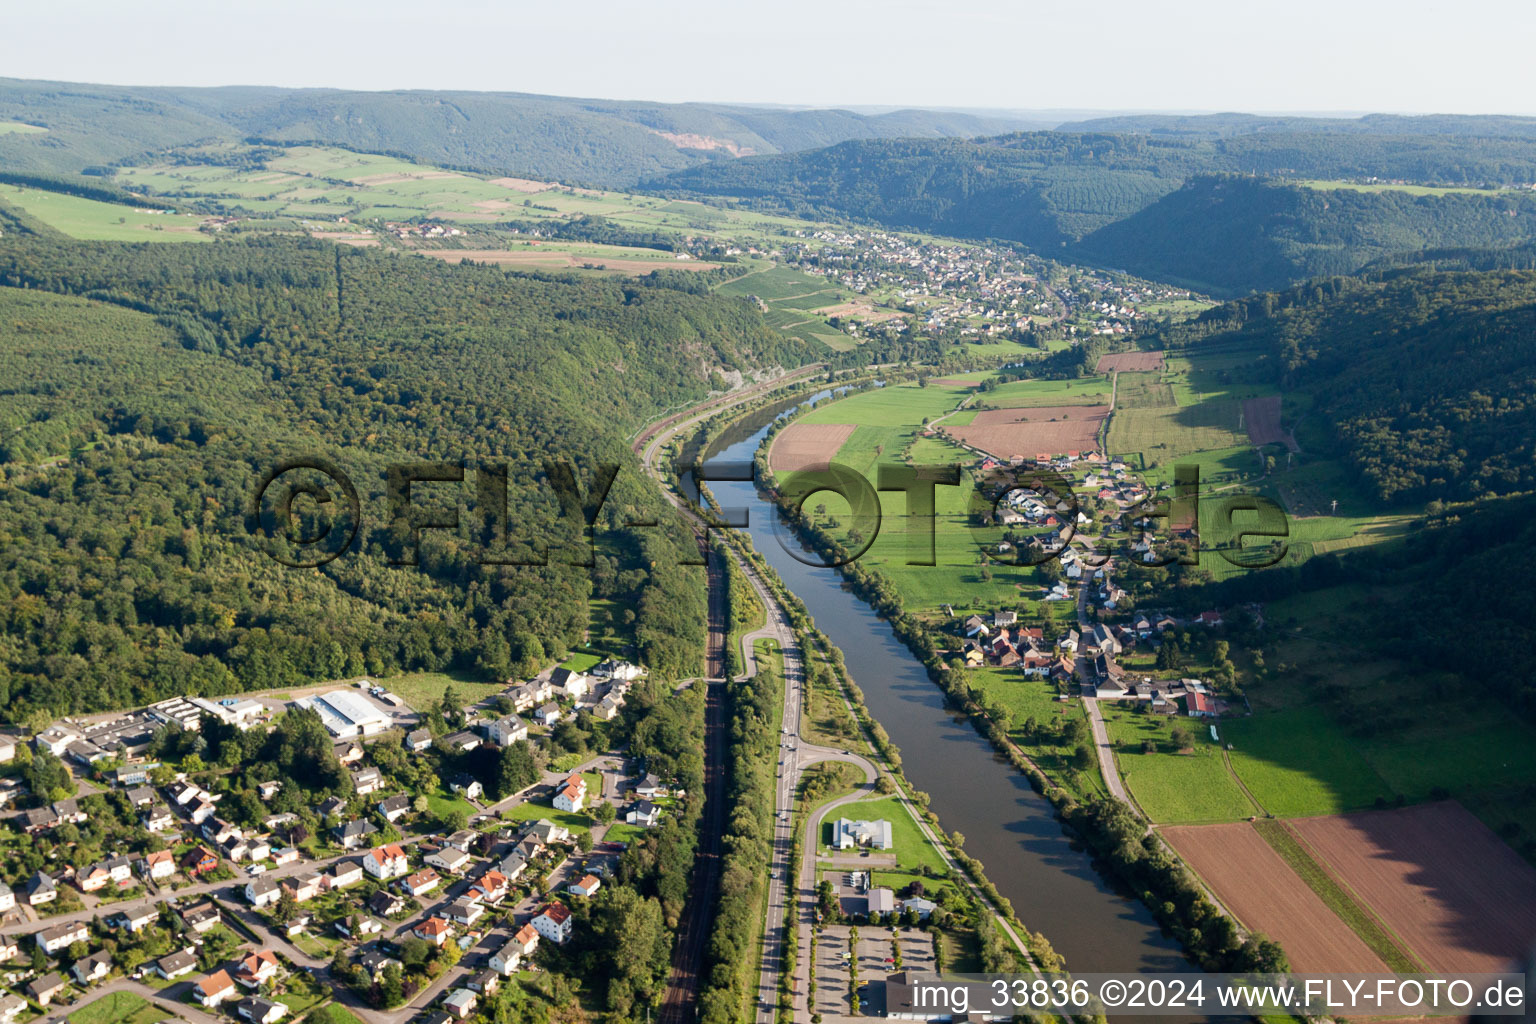 Village on the river bank areas of the river Saar in the district Beurig in Saarburg in the state Rhineland-Palatinate, Germany